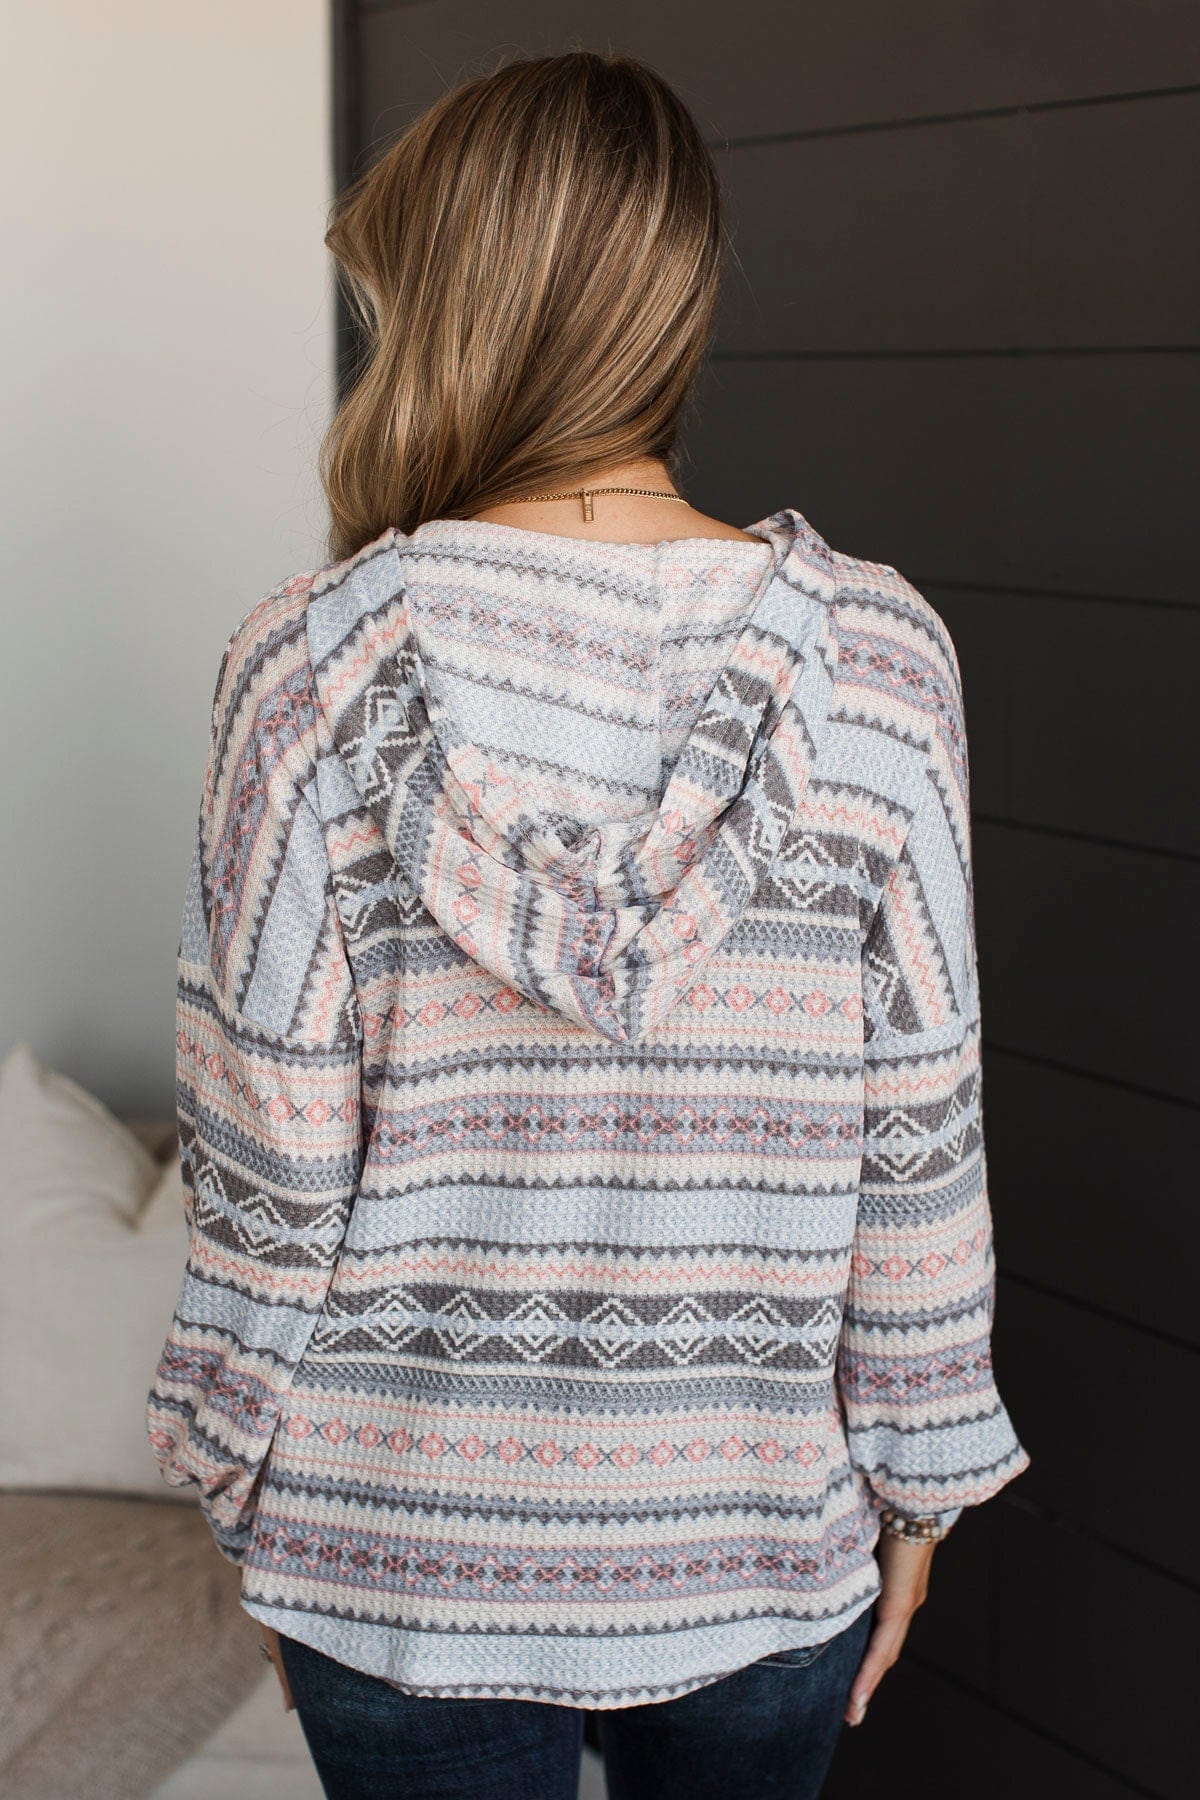 Find Your Groove Aztec Hooded Top- Charcoal & Pink